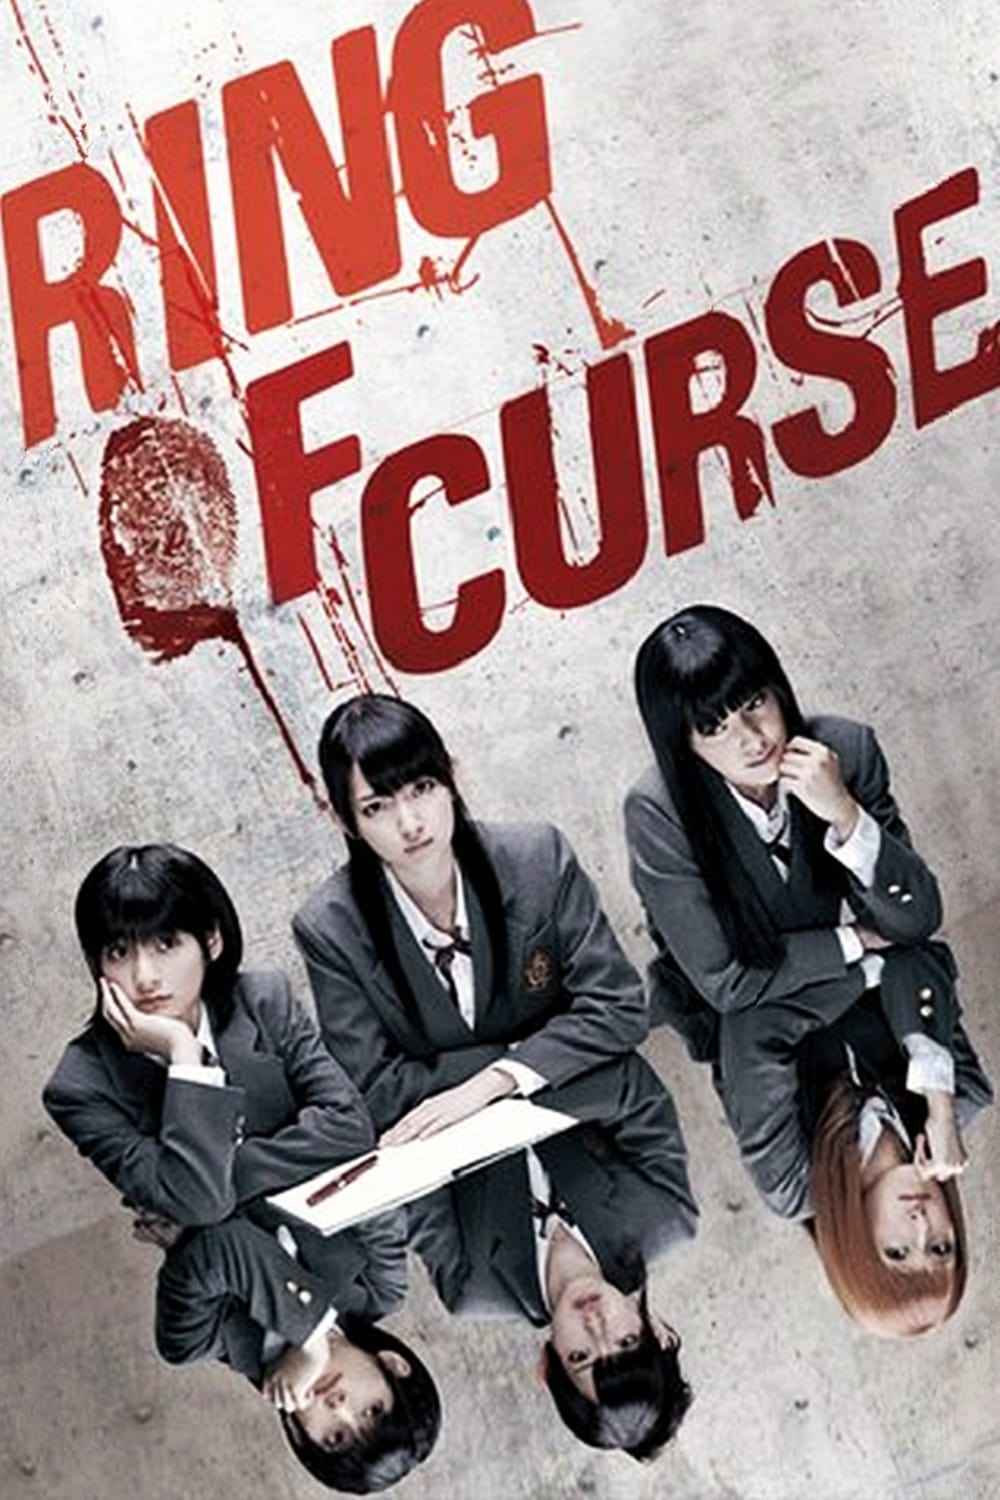 Ring of Curse (2011)